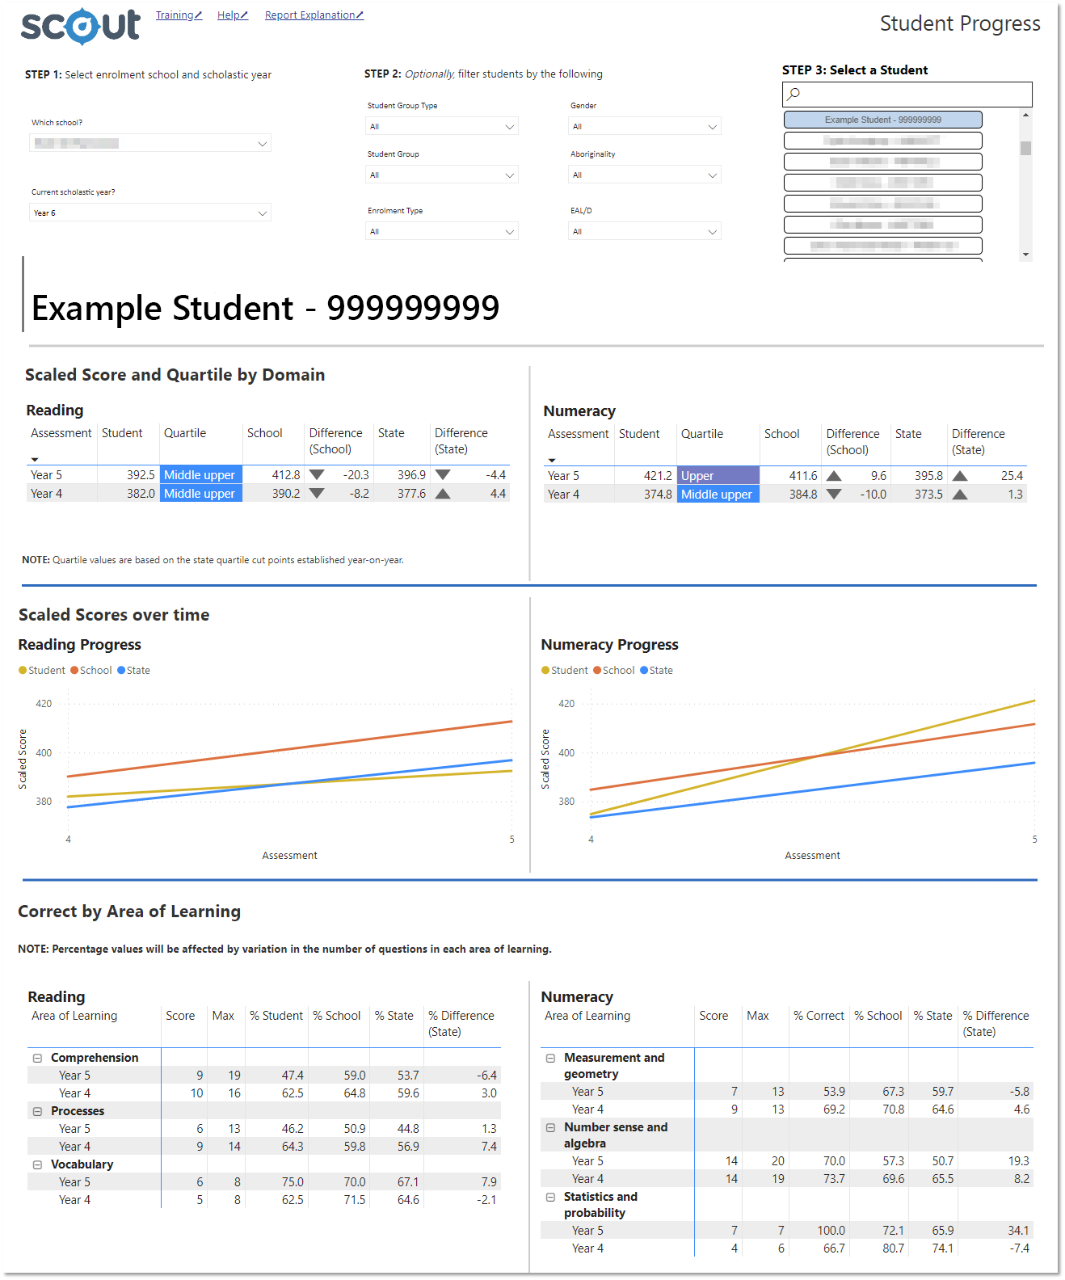 Screenshot of the Overview of Student Progress report in Scout